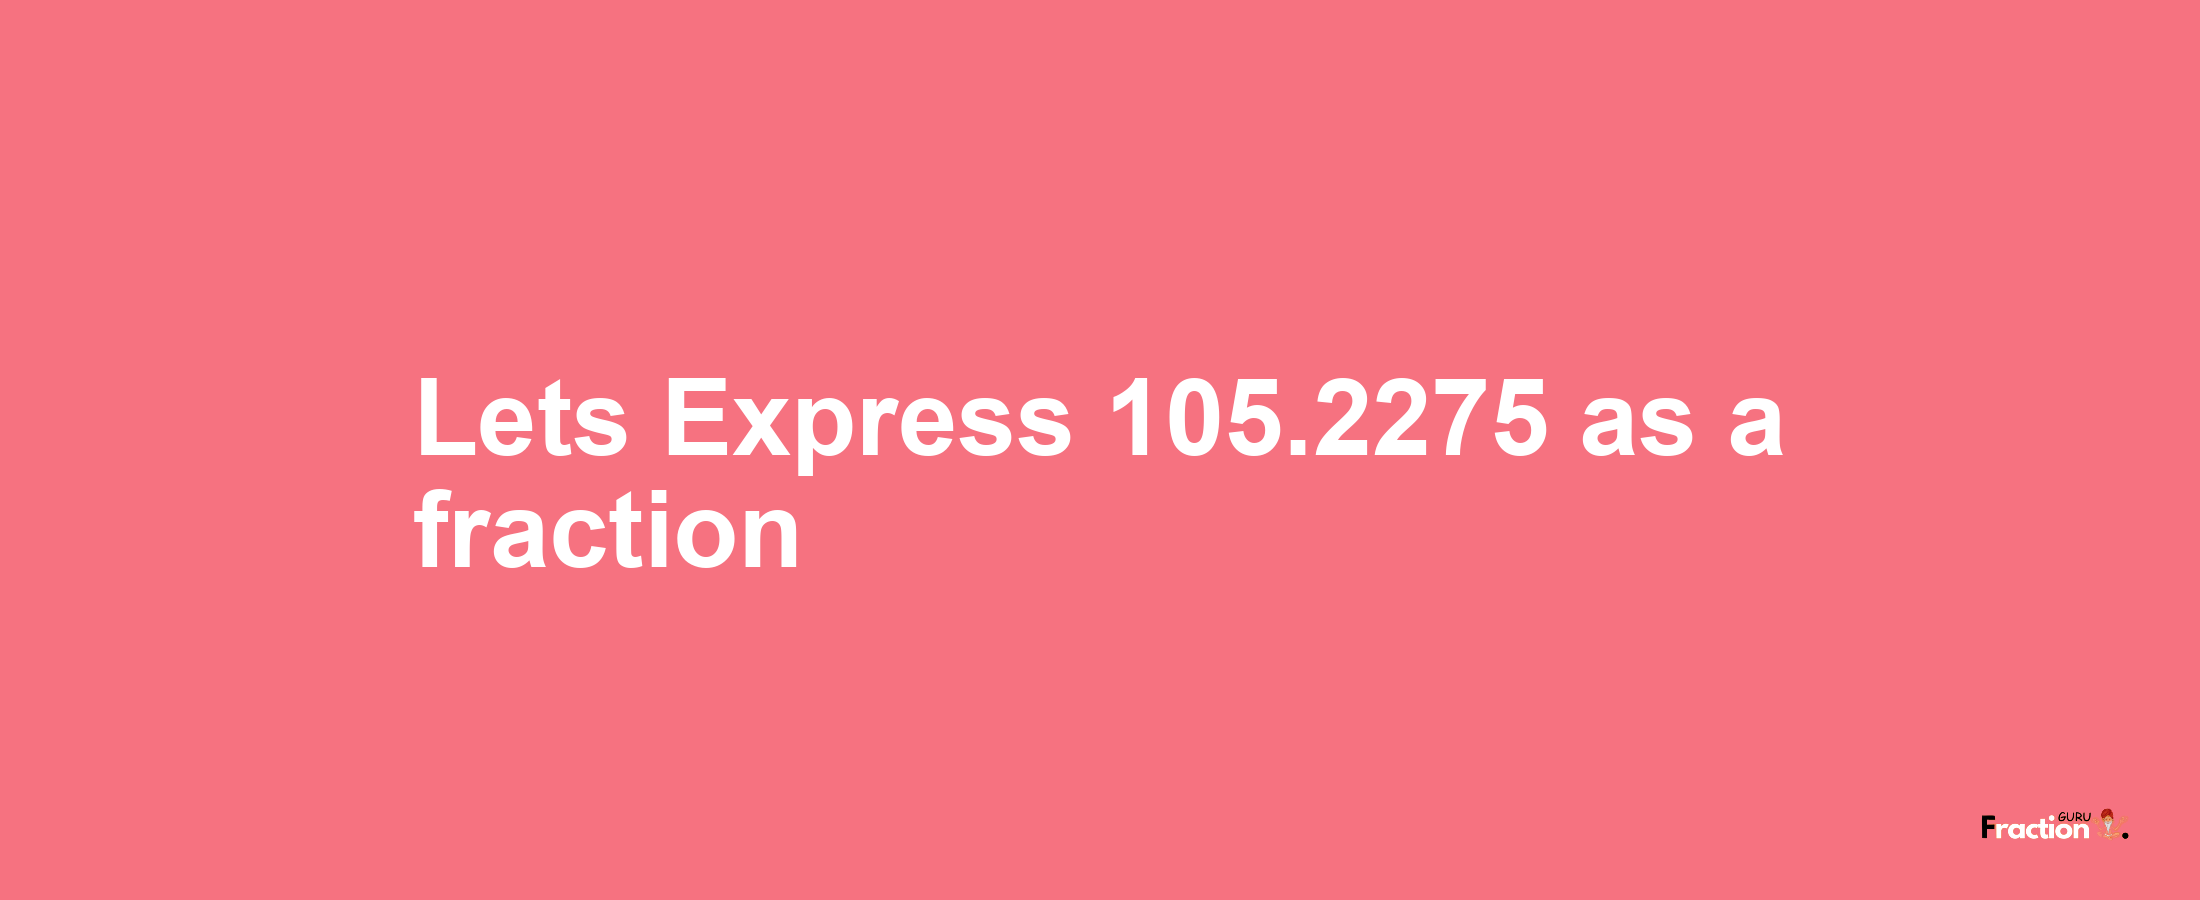 Lets Express 105.2275 as afraction